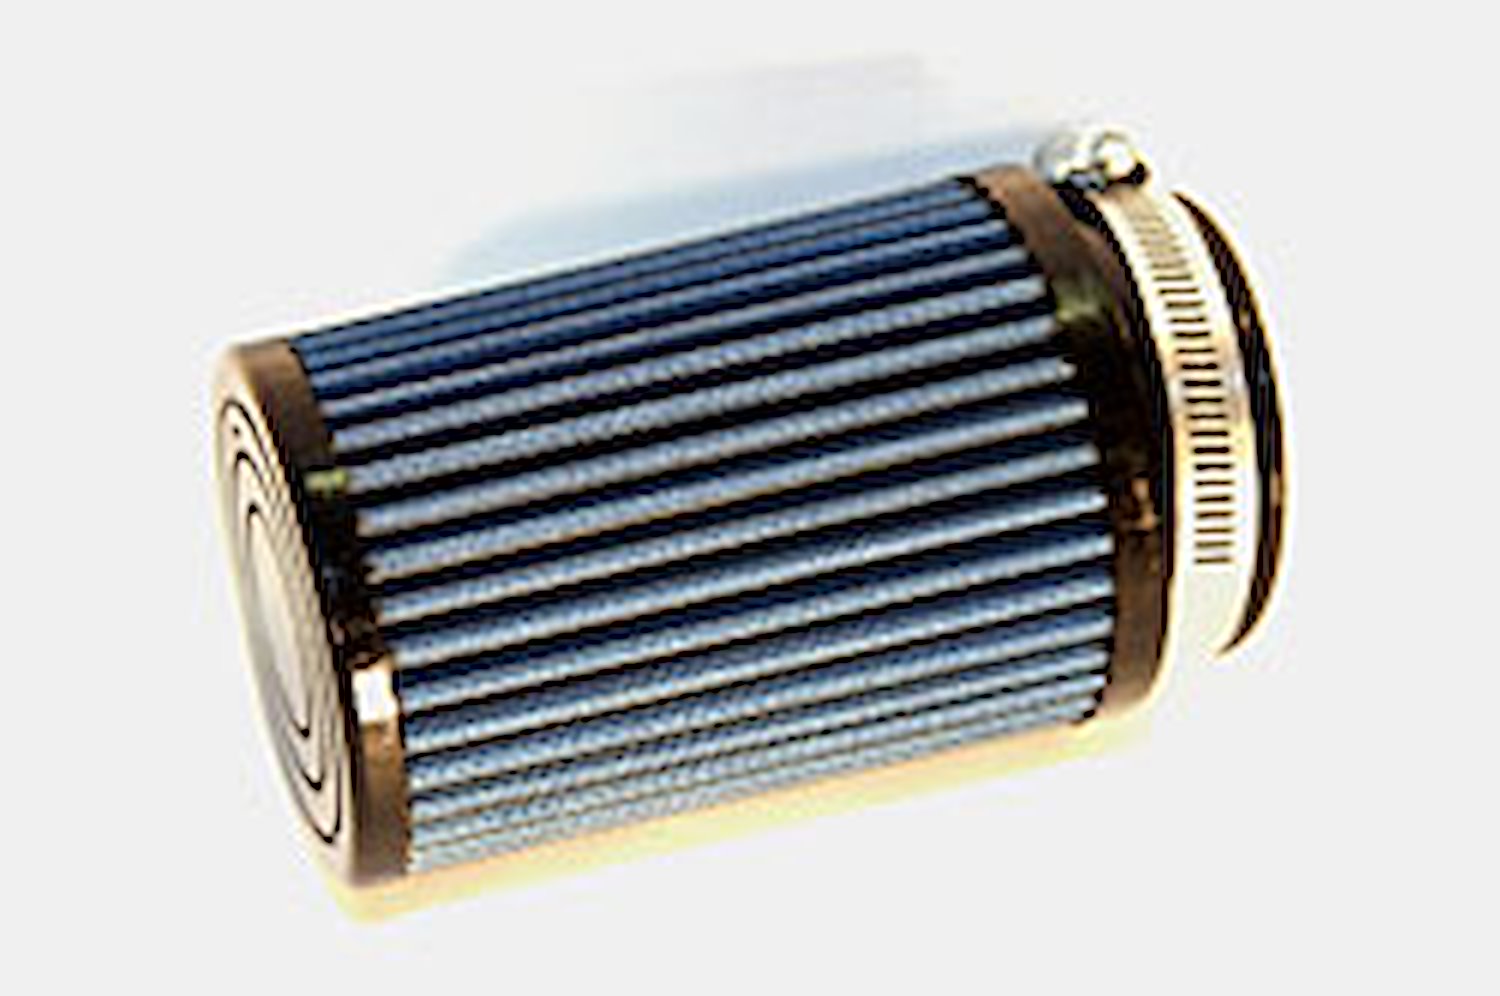 Blackwing Replacement Filter Fits: 847-21013/21014